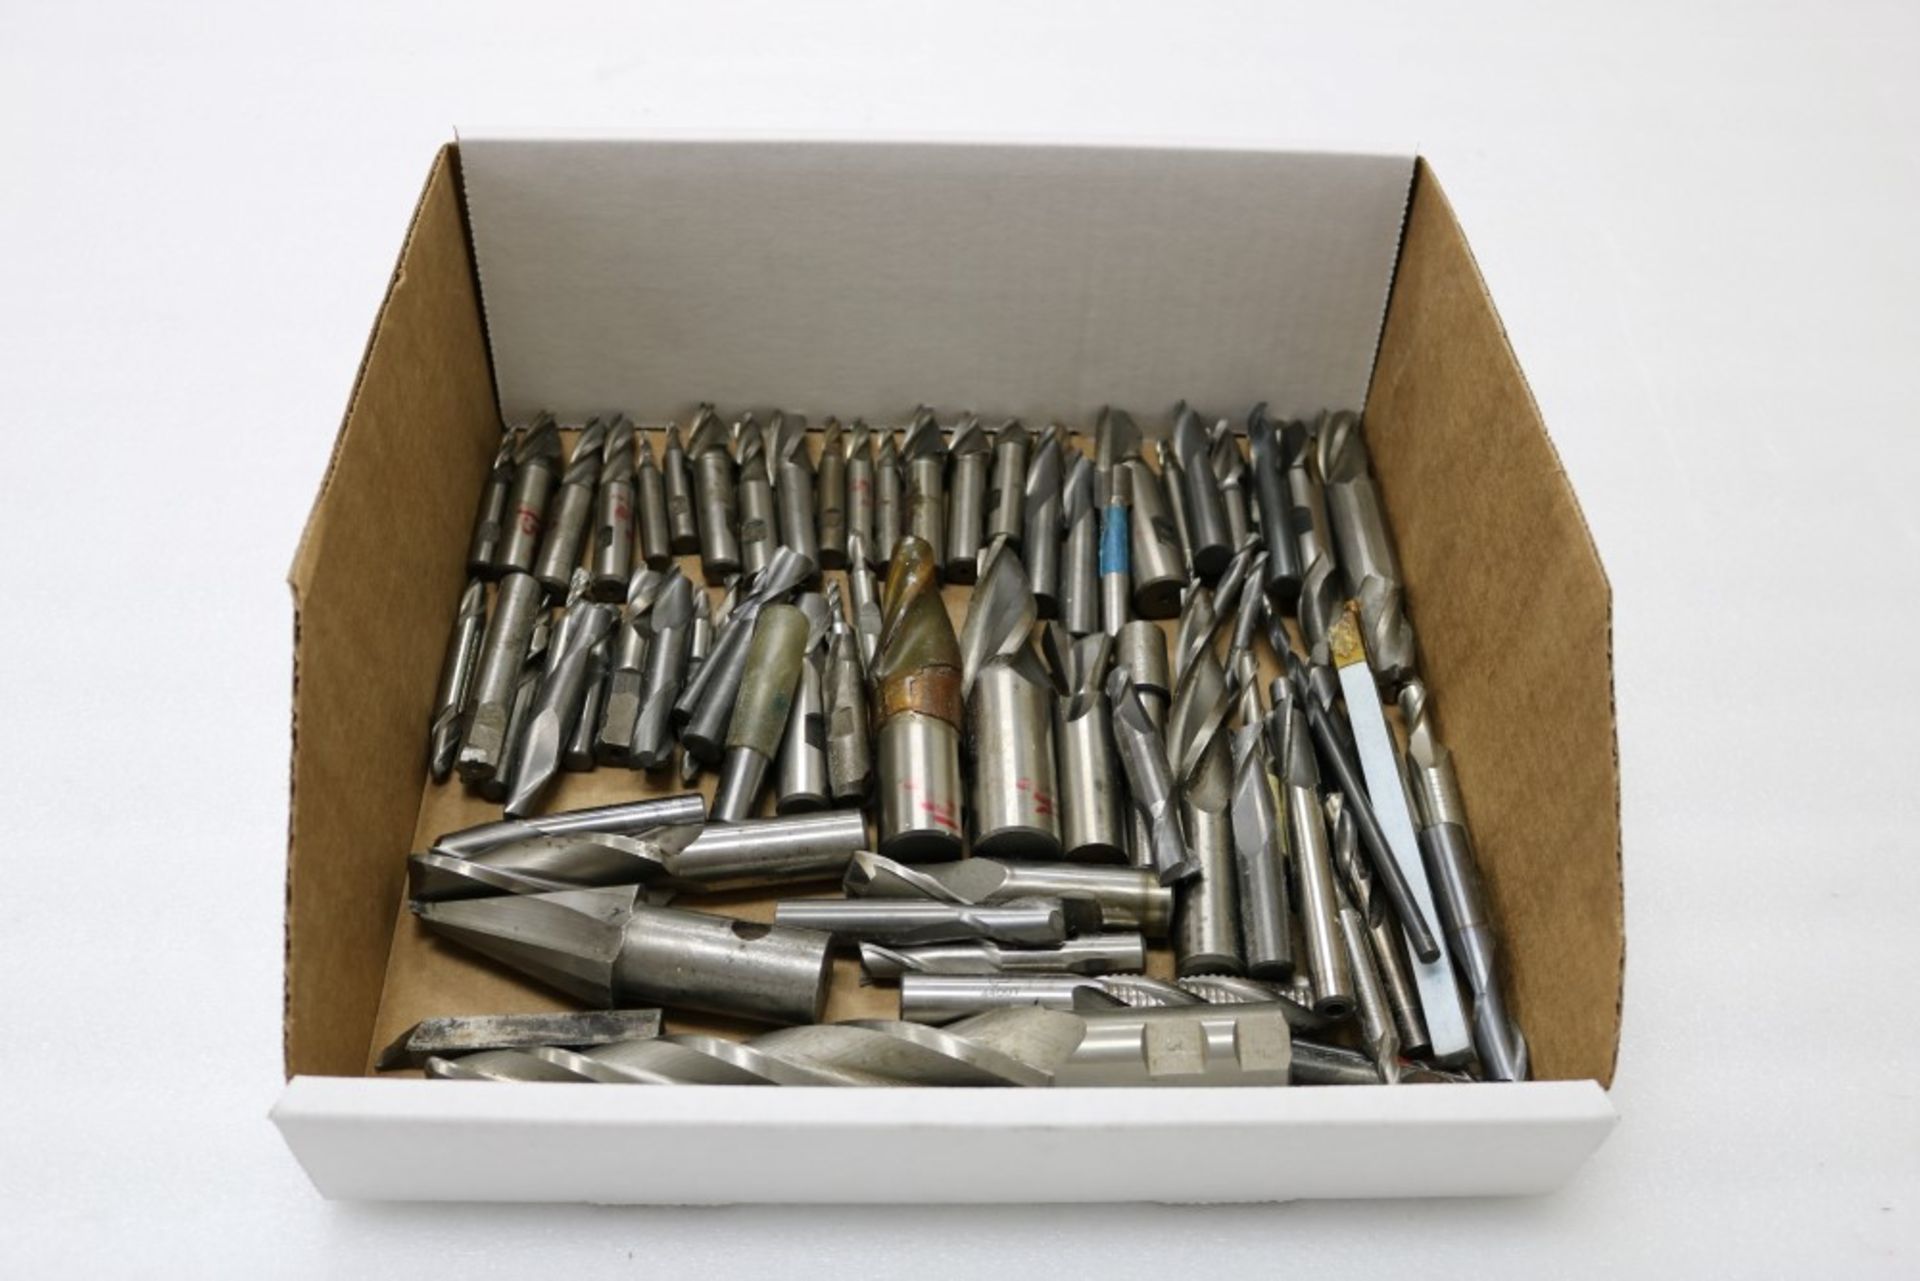 Box of Used End Mill Drills and Others Cut Mostly Plastic